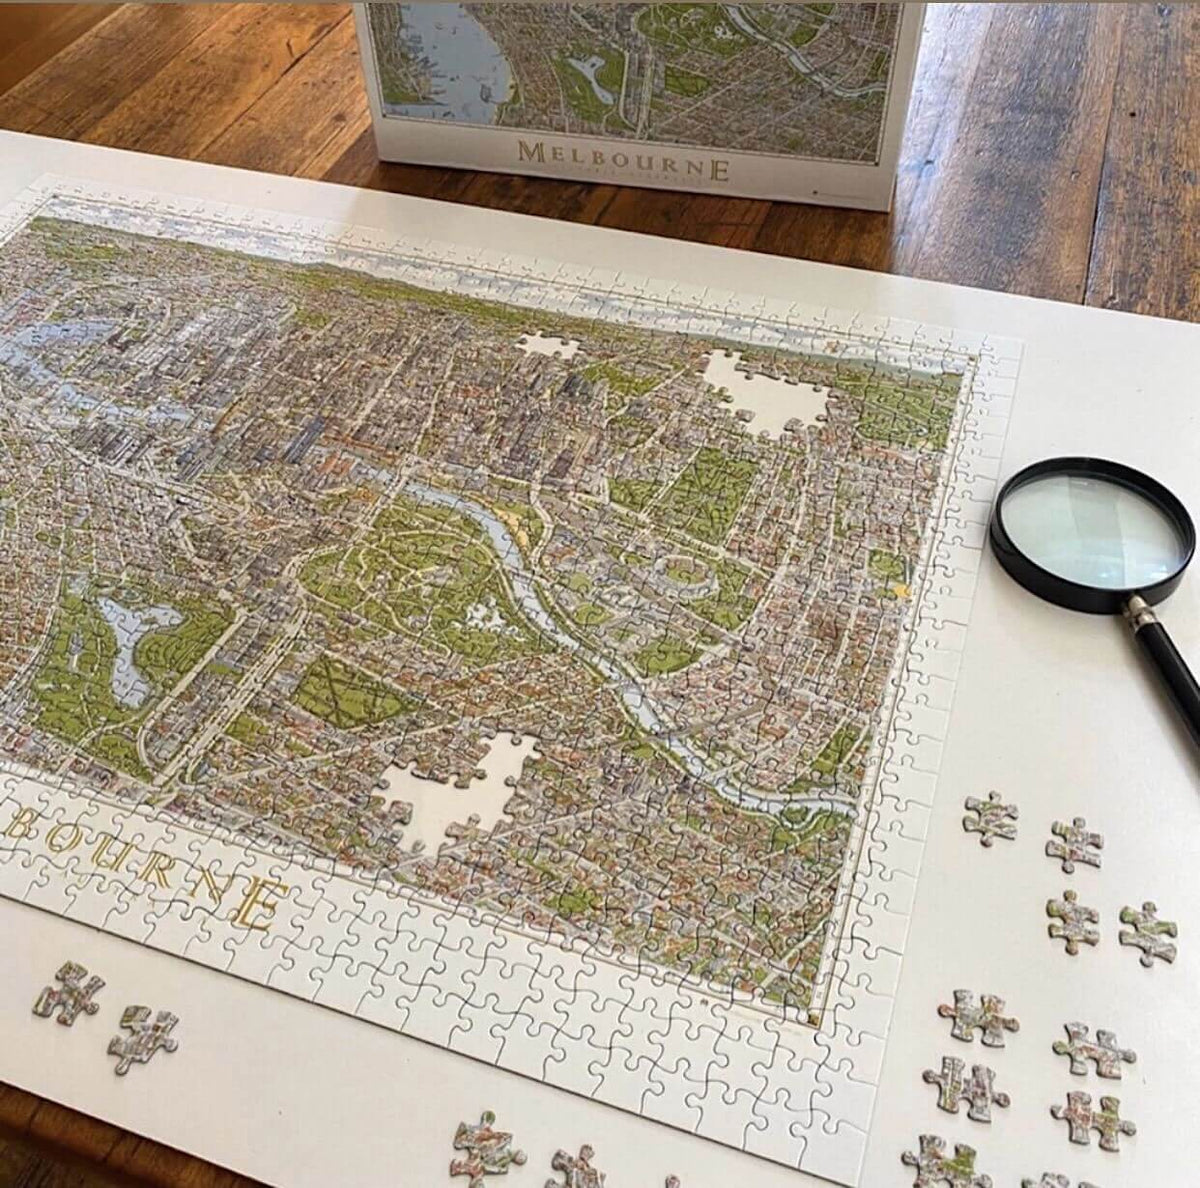 The Melbourne Map 1,000-piece jigsaw puzzle almost completed on a natural timber table with the box in the background. There are some loose pieces around the edge of the puzzle and a magnifying glass on the right. 